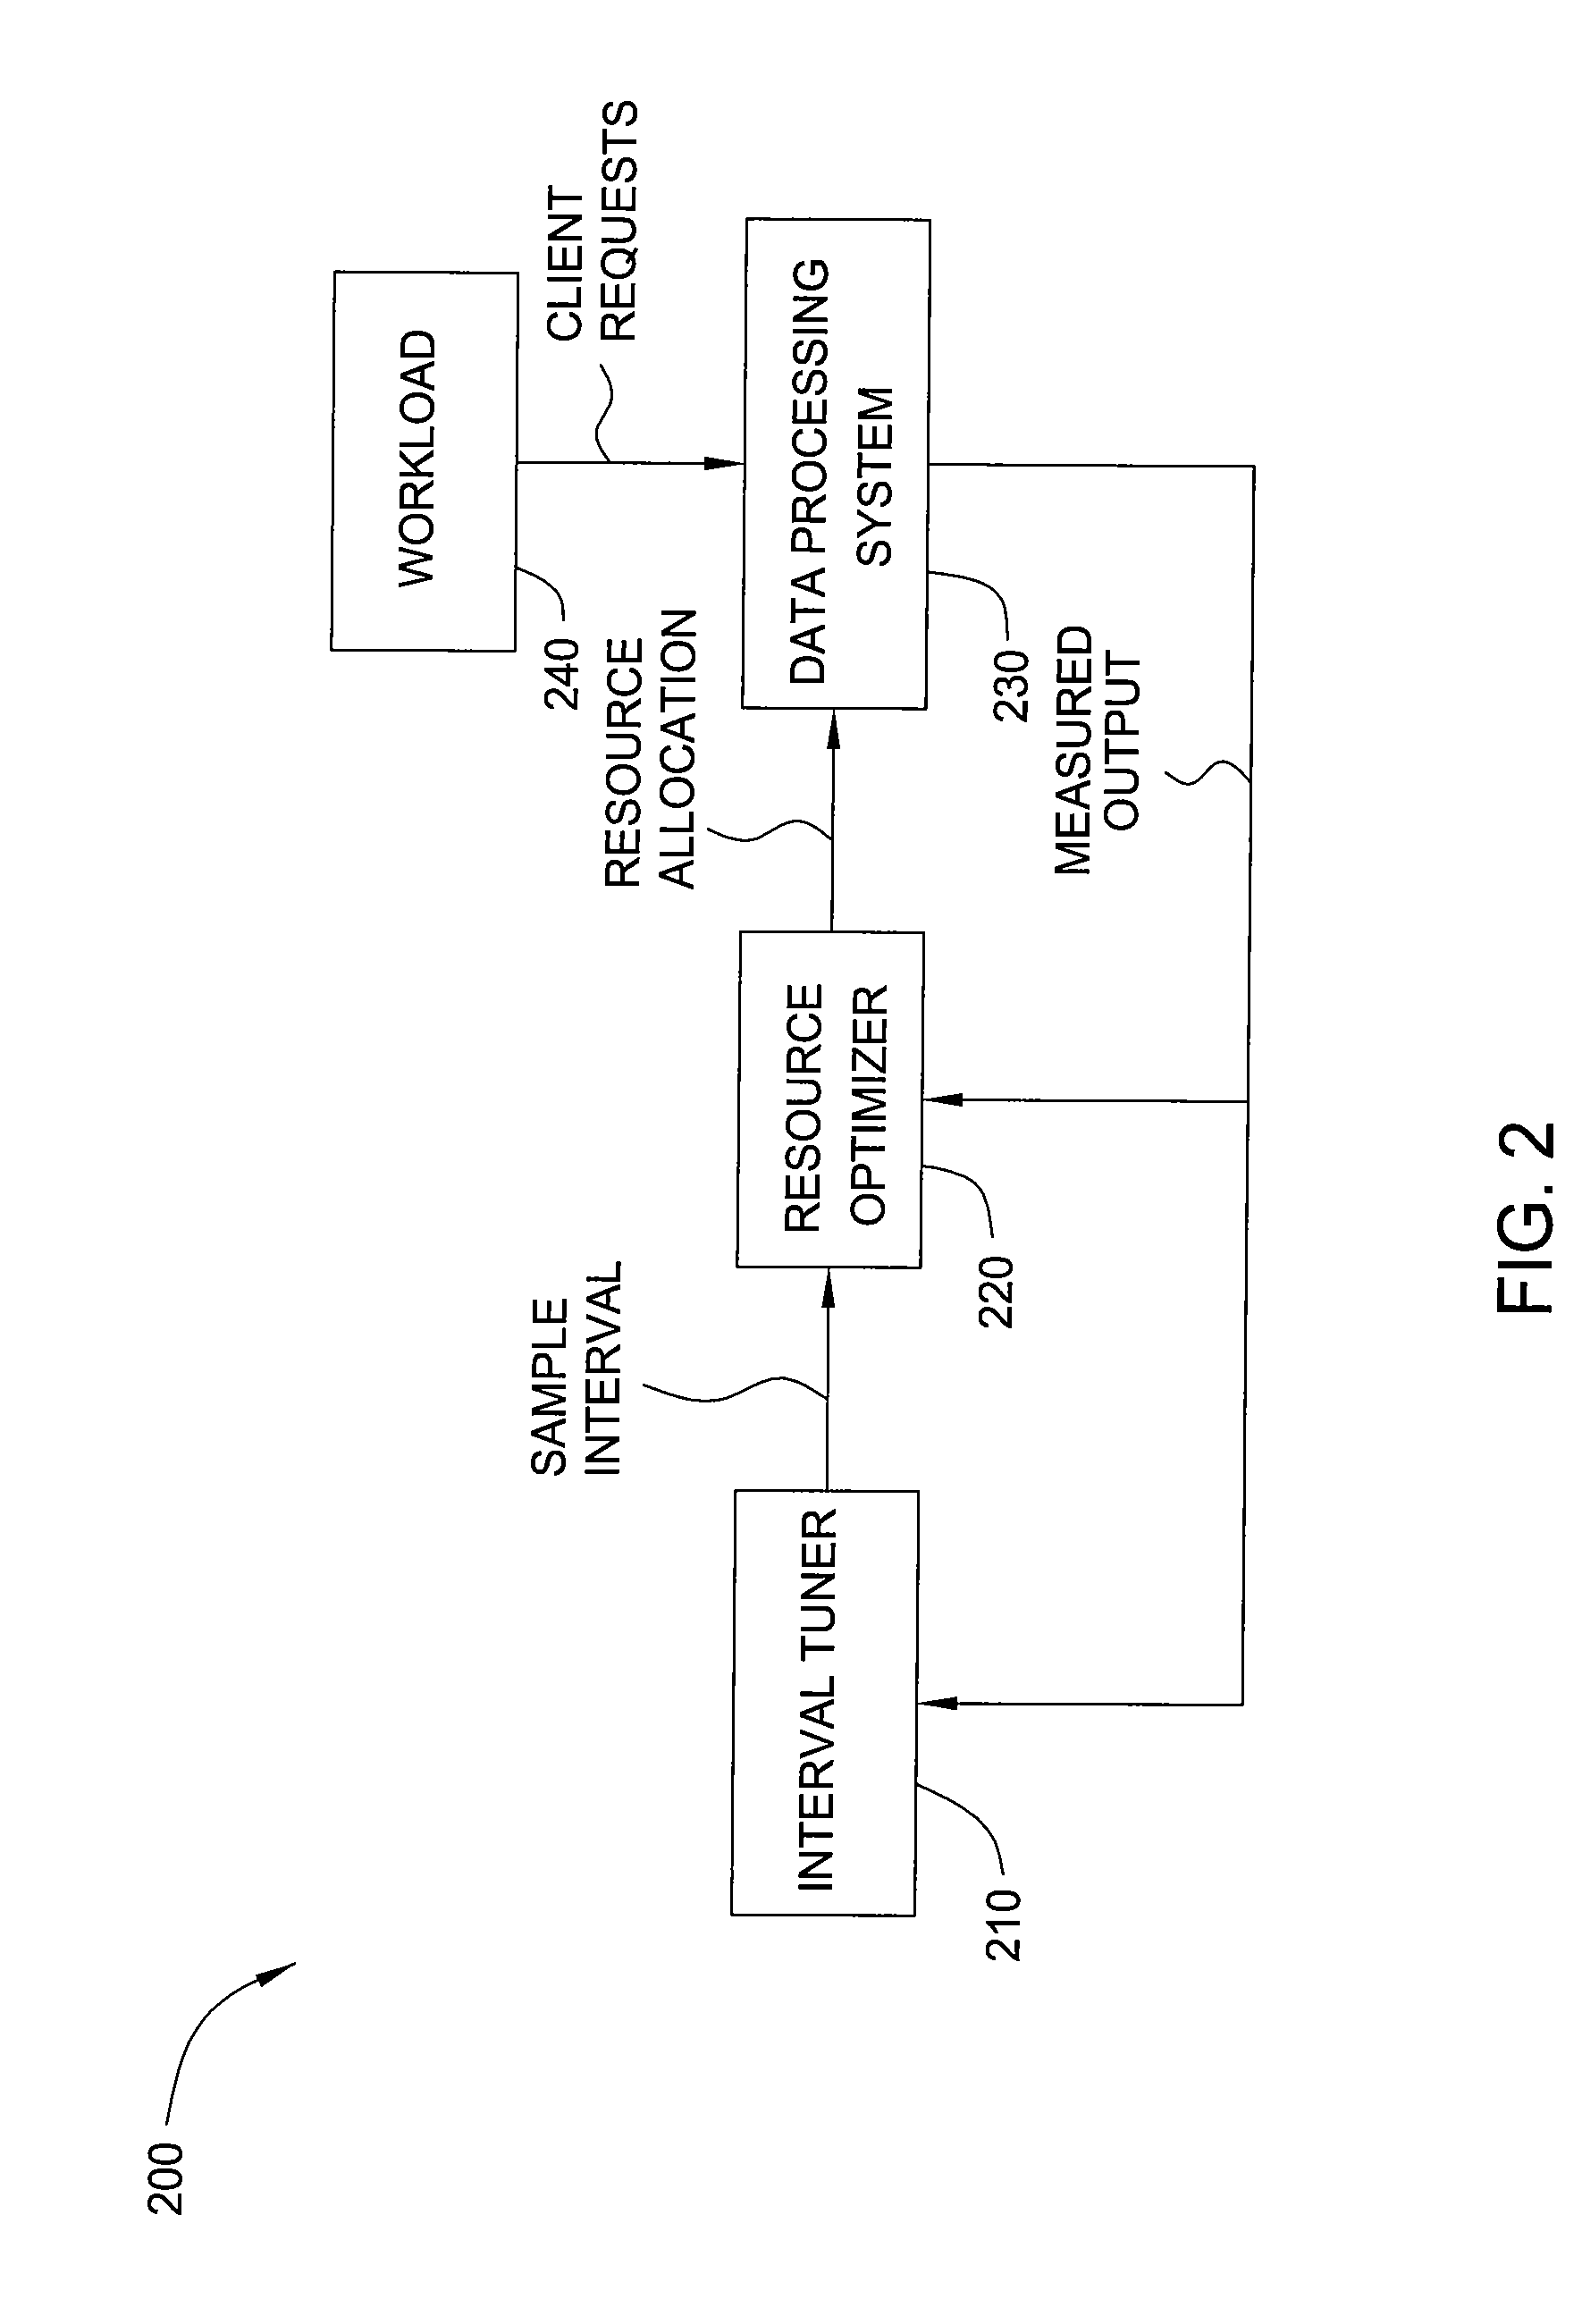 Method and apparatus for online sample interval determination